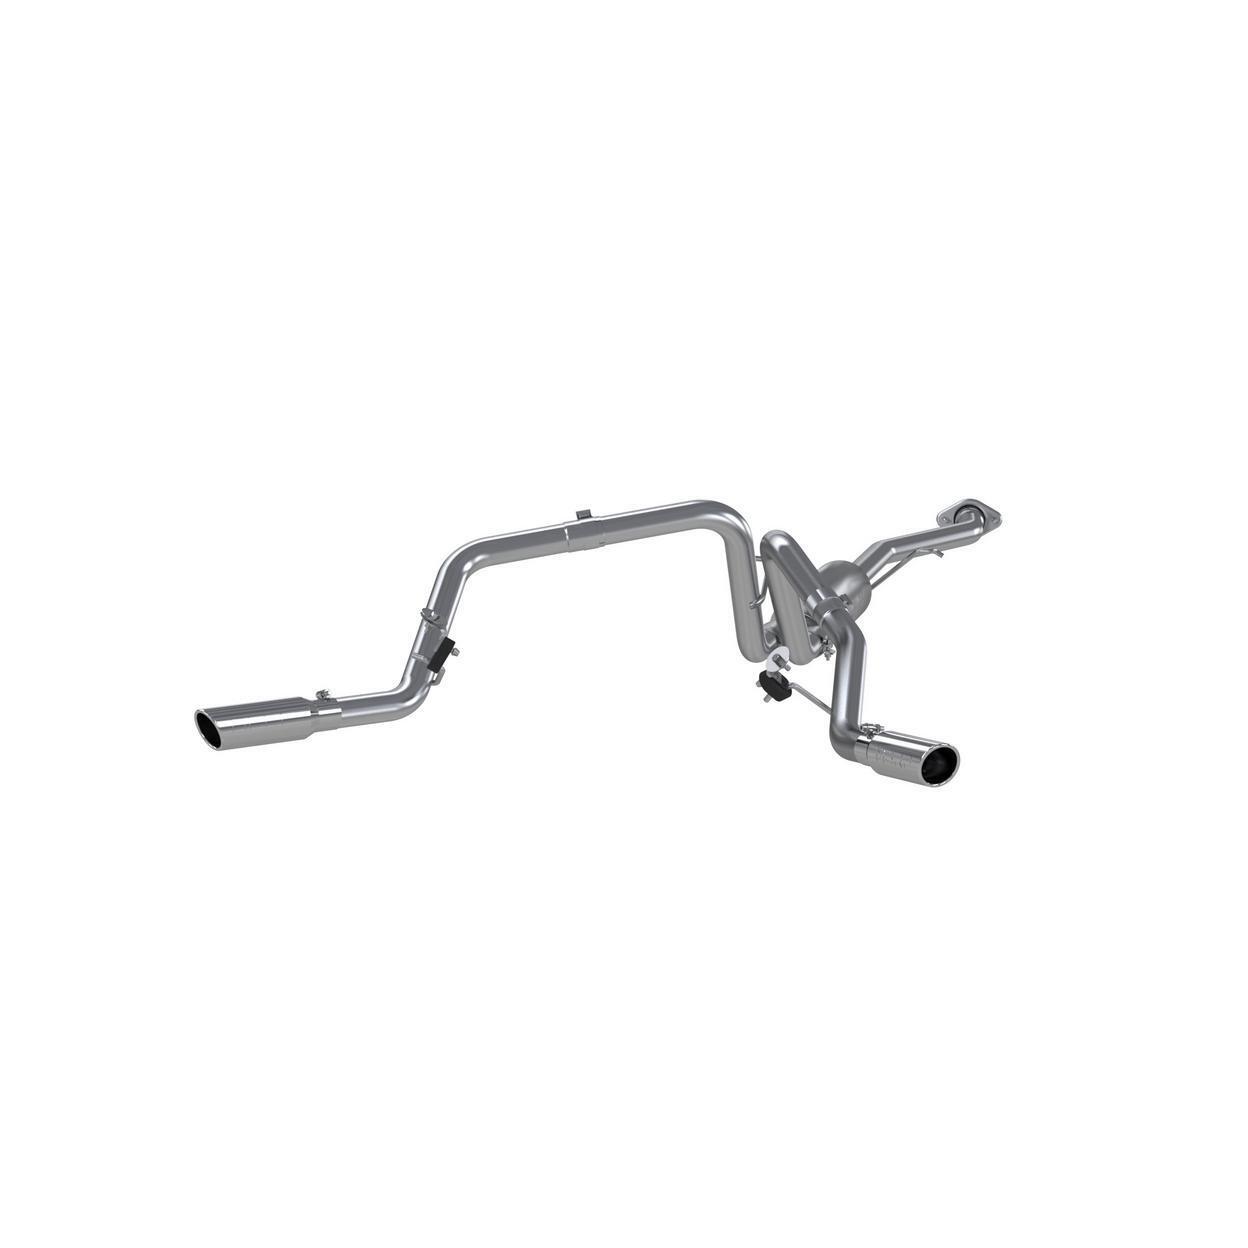 MBRP Exhaust S5018AL-NX Exhaust System Kit for 2006 GMC Sierra 1500